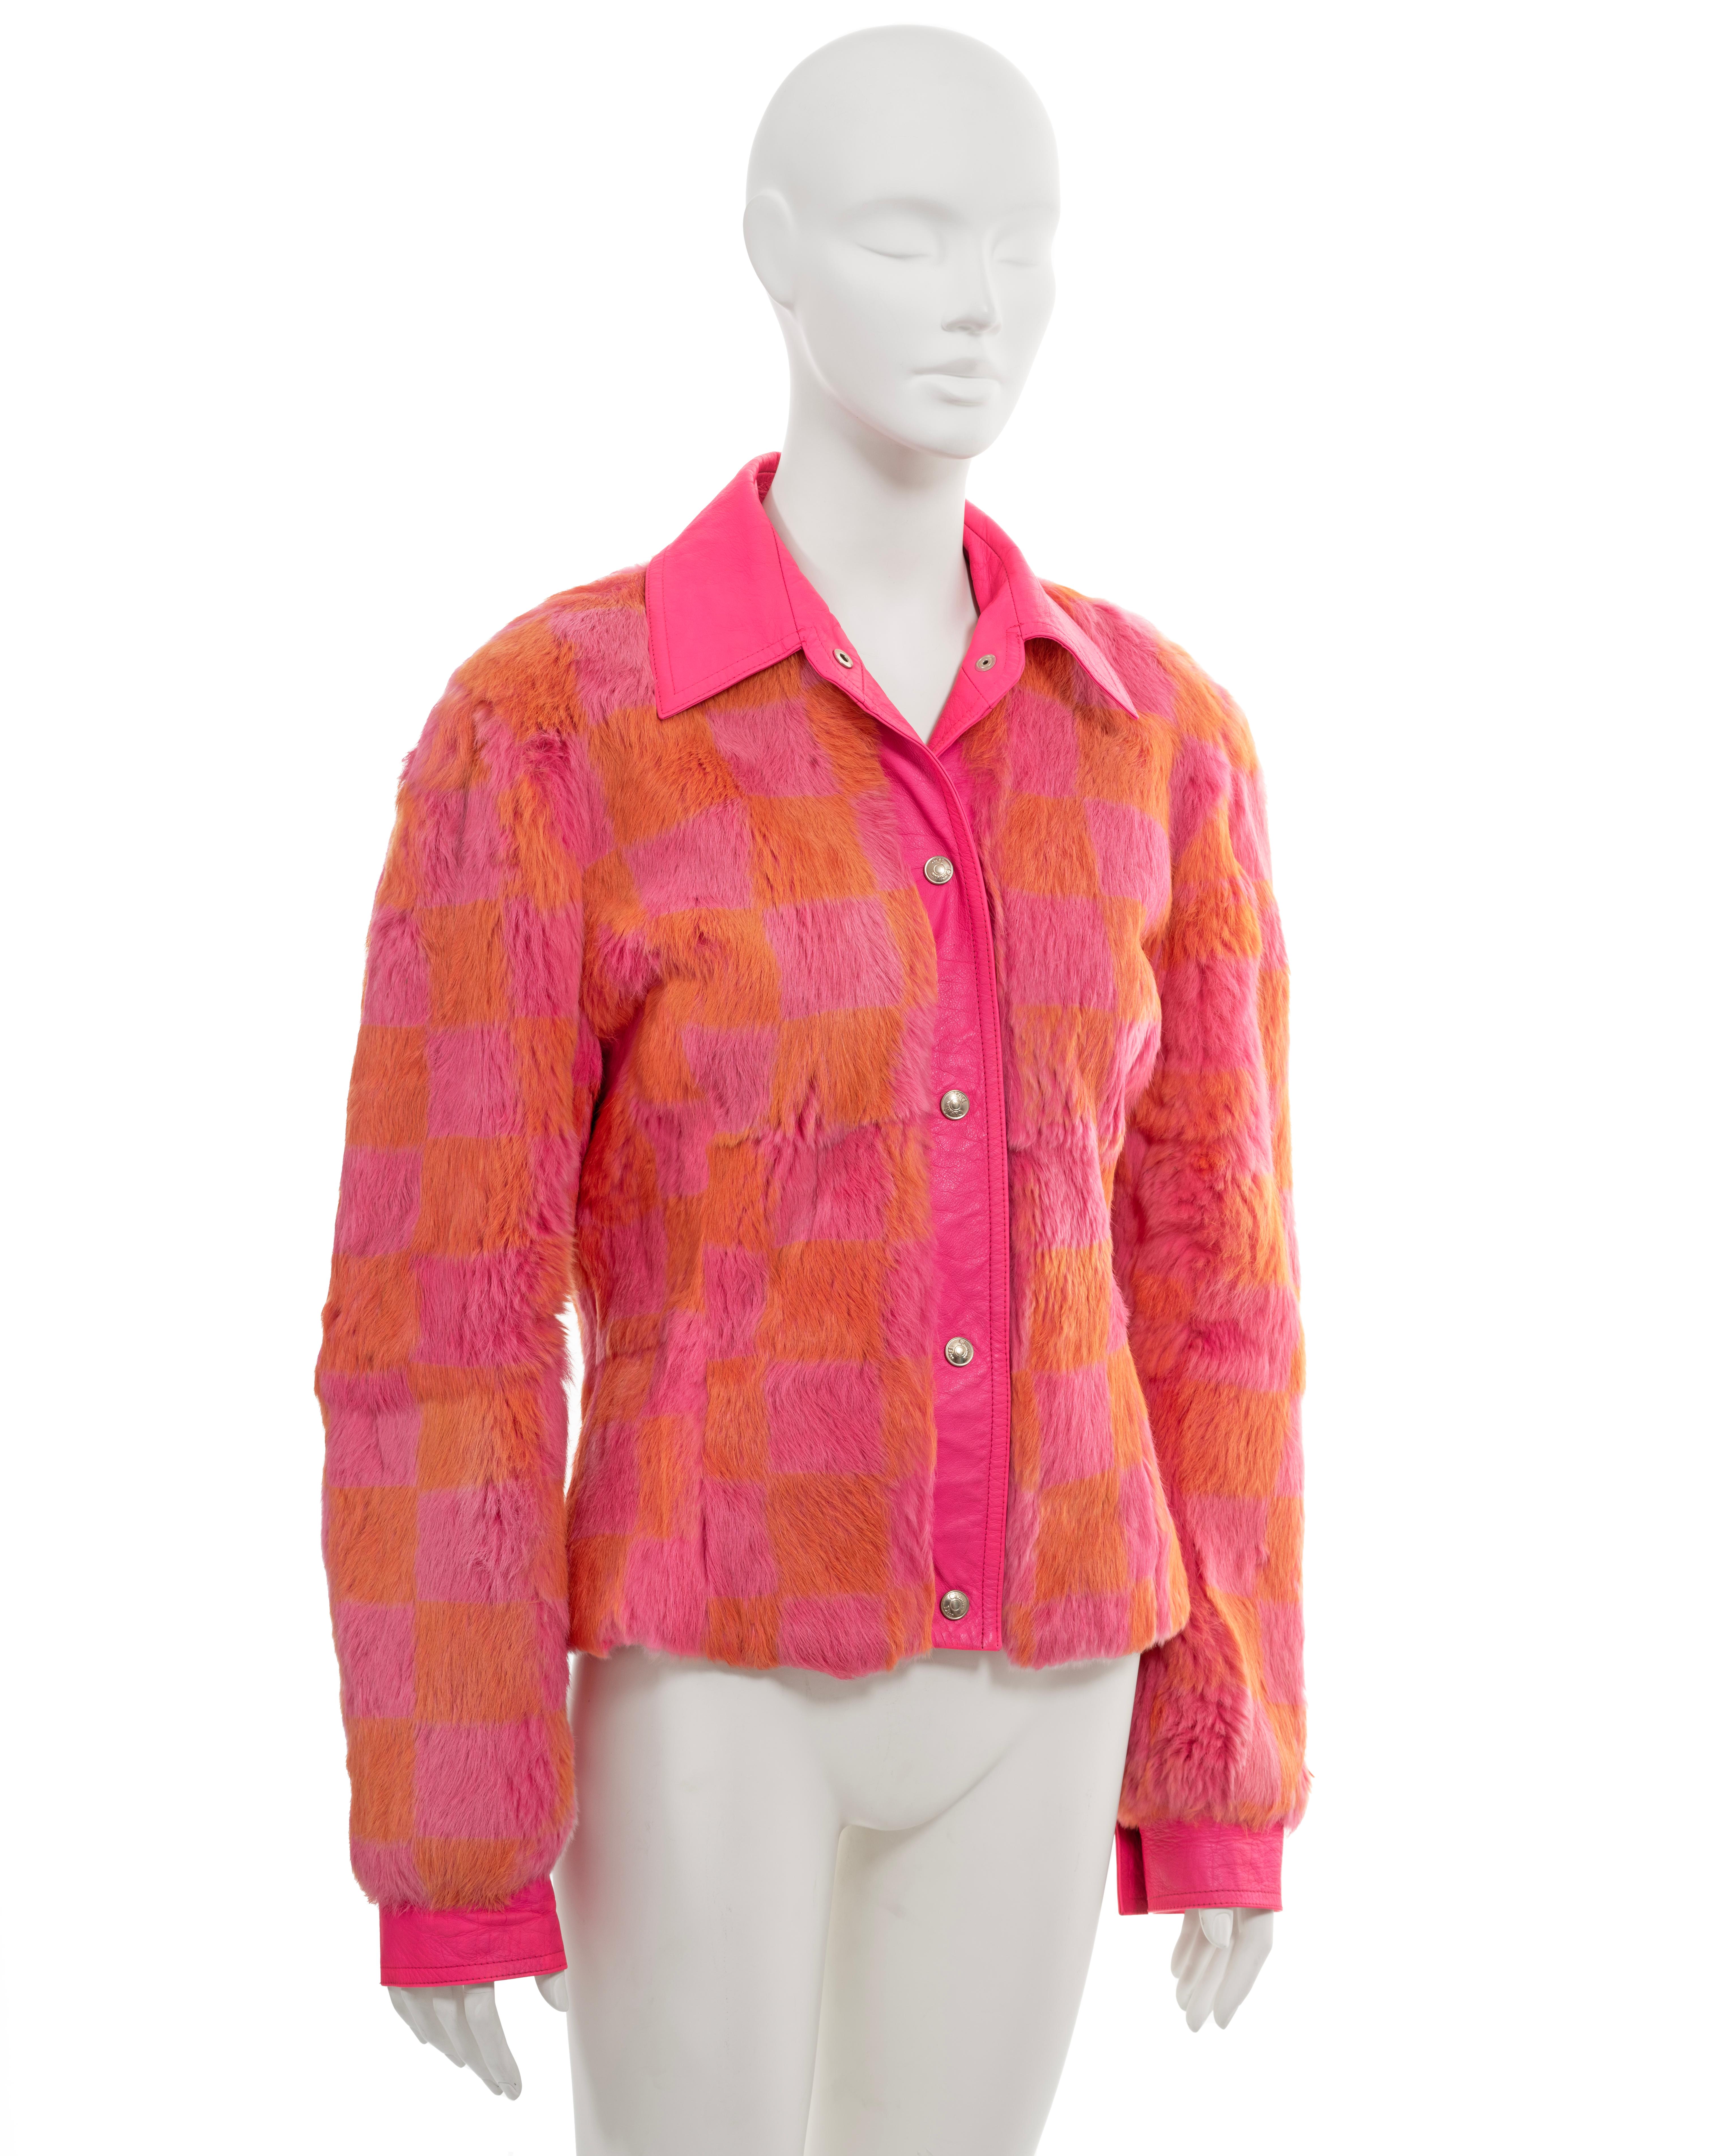 Christian Dior by John Galliano pink and orange fur shirt jacket, fw 2001 In Excellent Condition For Sale In London, GB